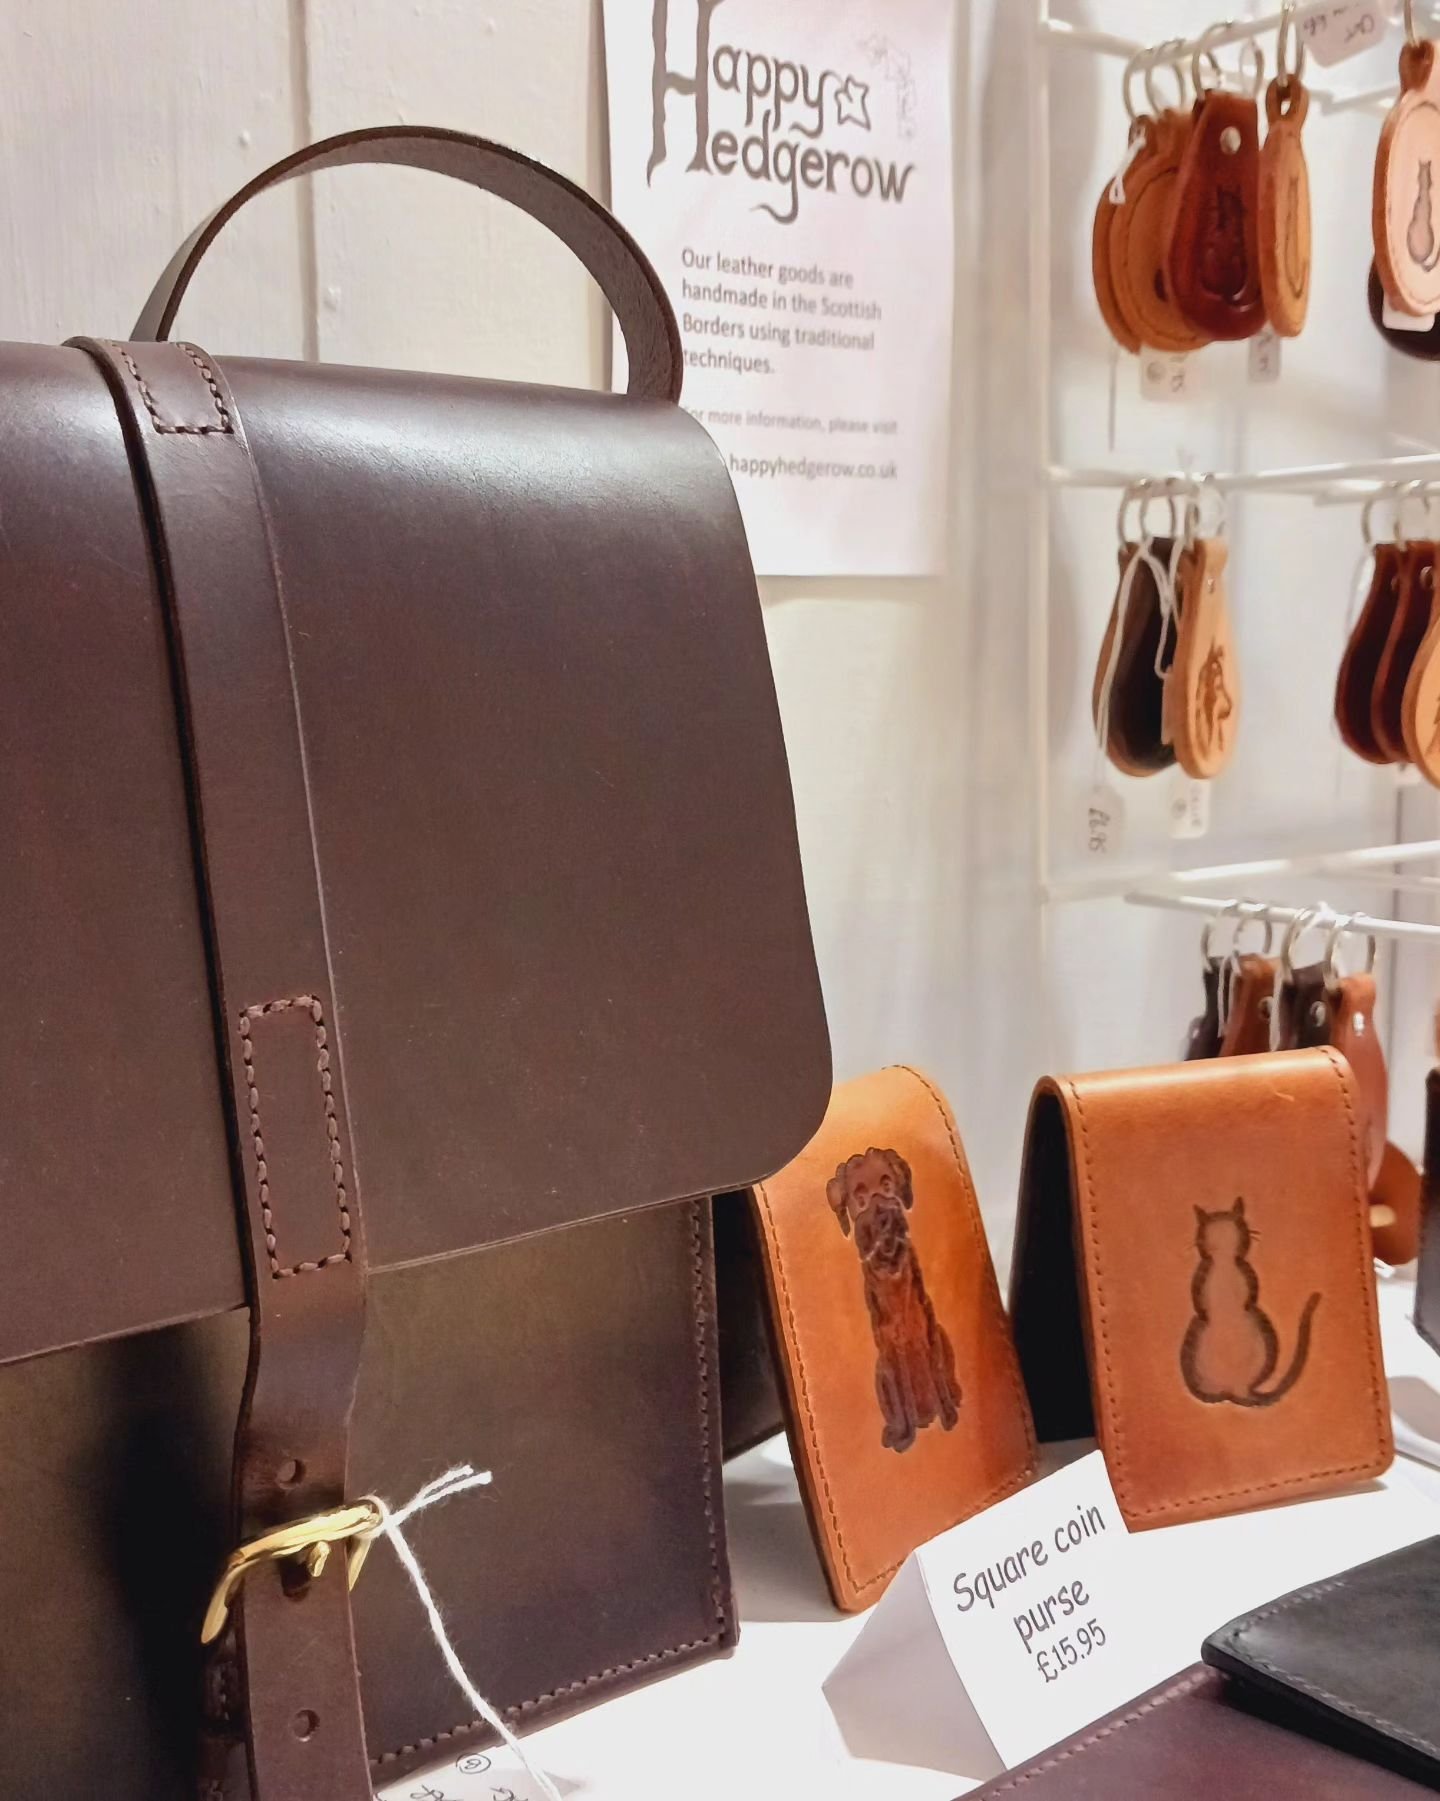 @happyhedgerow at The Crafters.  Beautifully crafted leather accesories. 
#accesories #leatherwork #thecrafters ##thecraftersmelrose